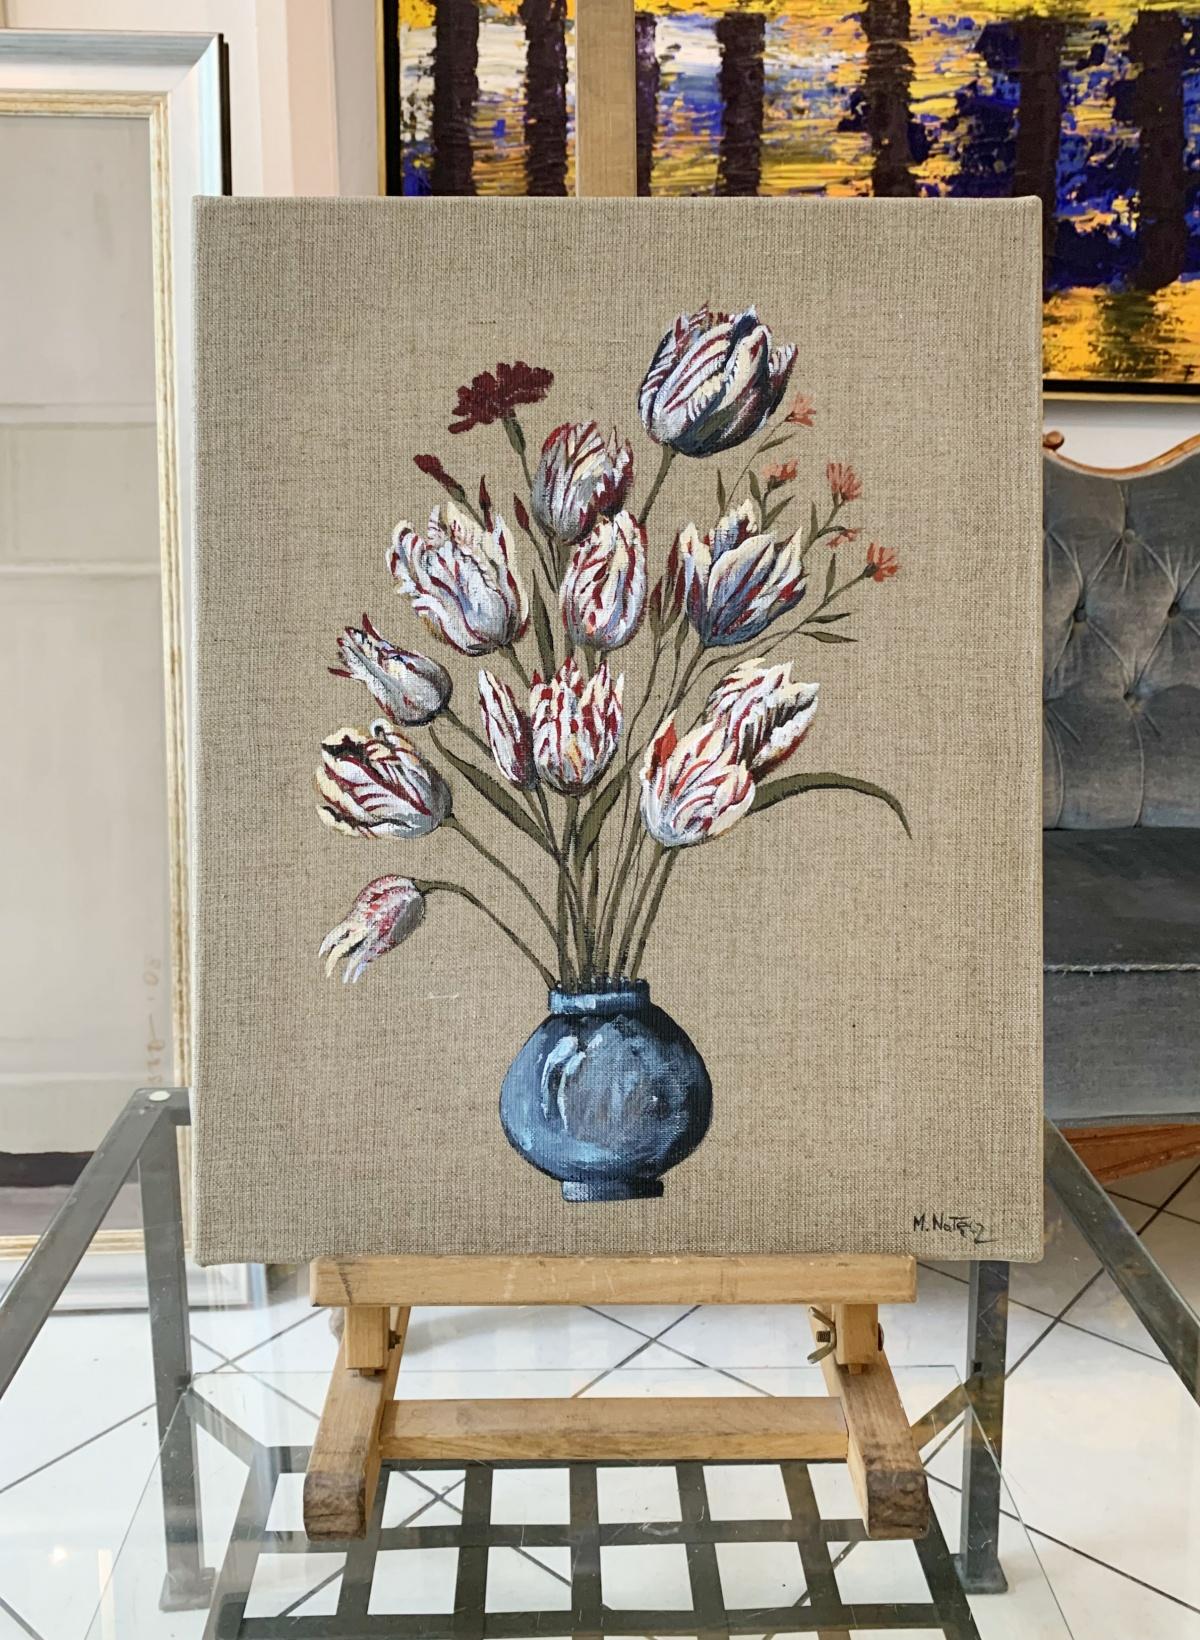 Tulips - Figurative acrylic painting, Realistic, Vibrant colors, Still life - Painting by Magdalena Nałęcz